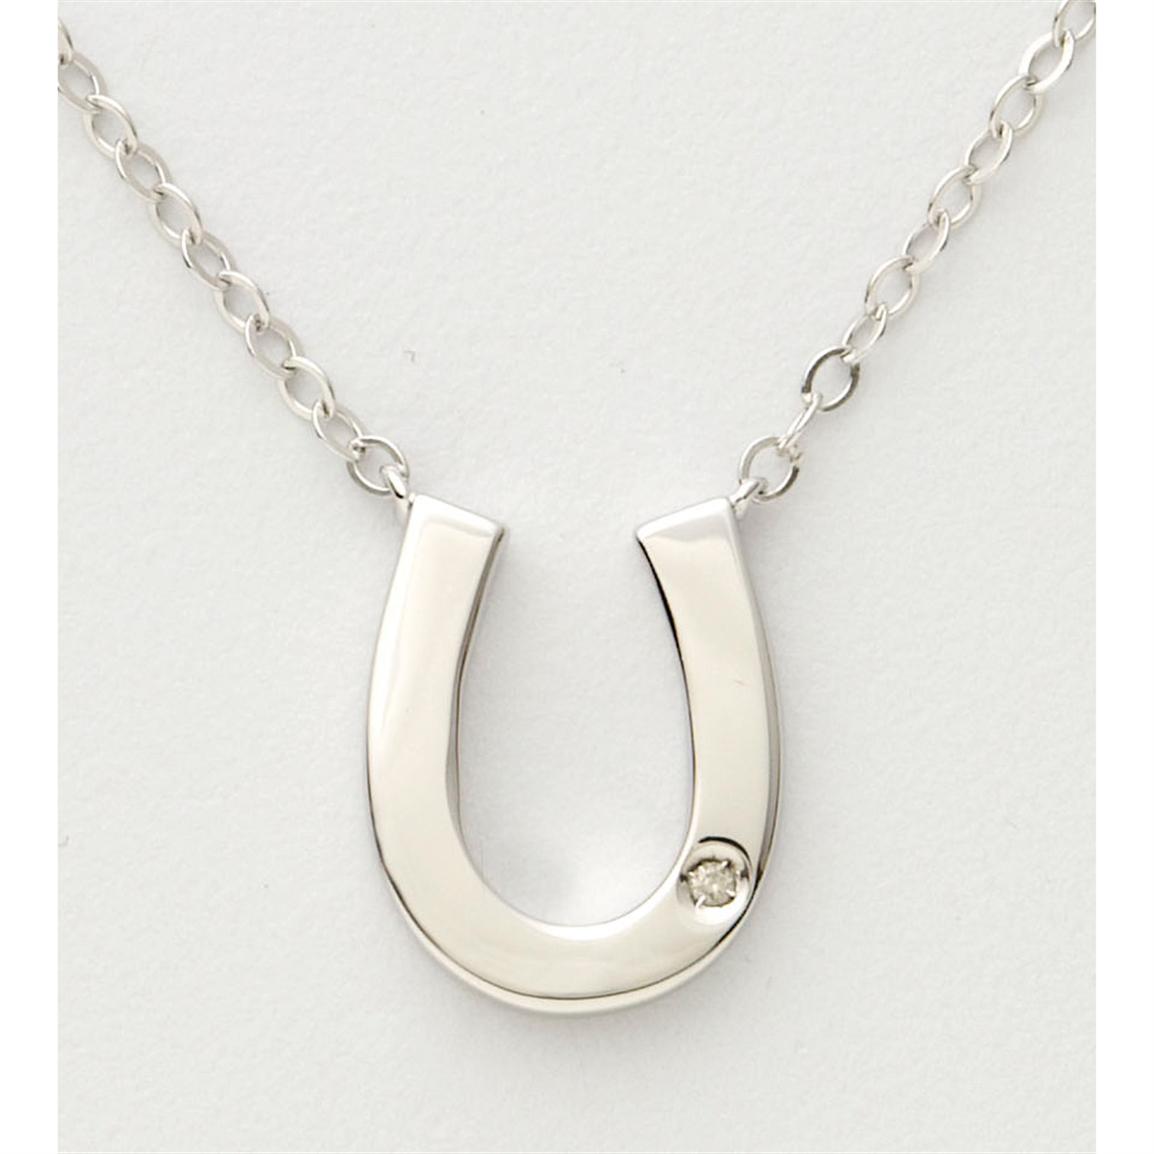 Jilco Inc. Diamond and Sterling Silver Horseshoe Necklace - 176123 ...